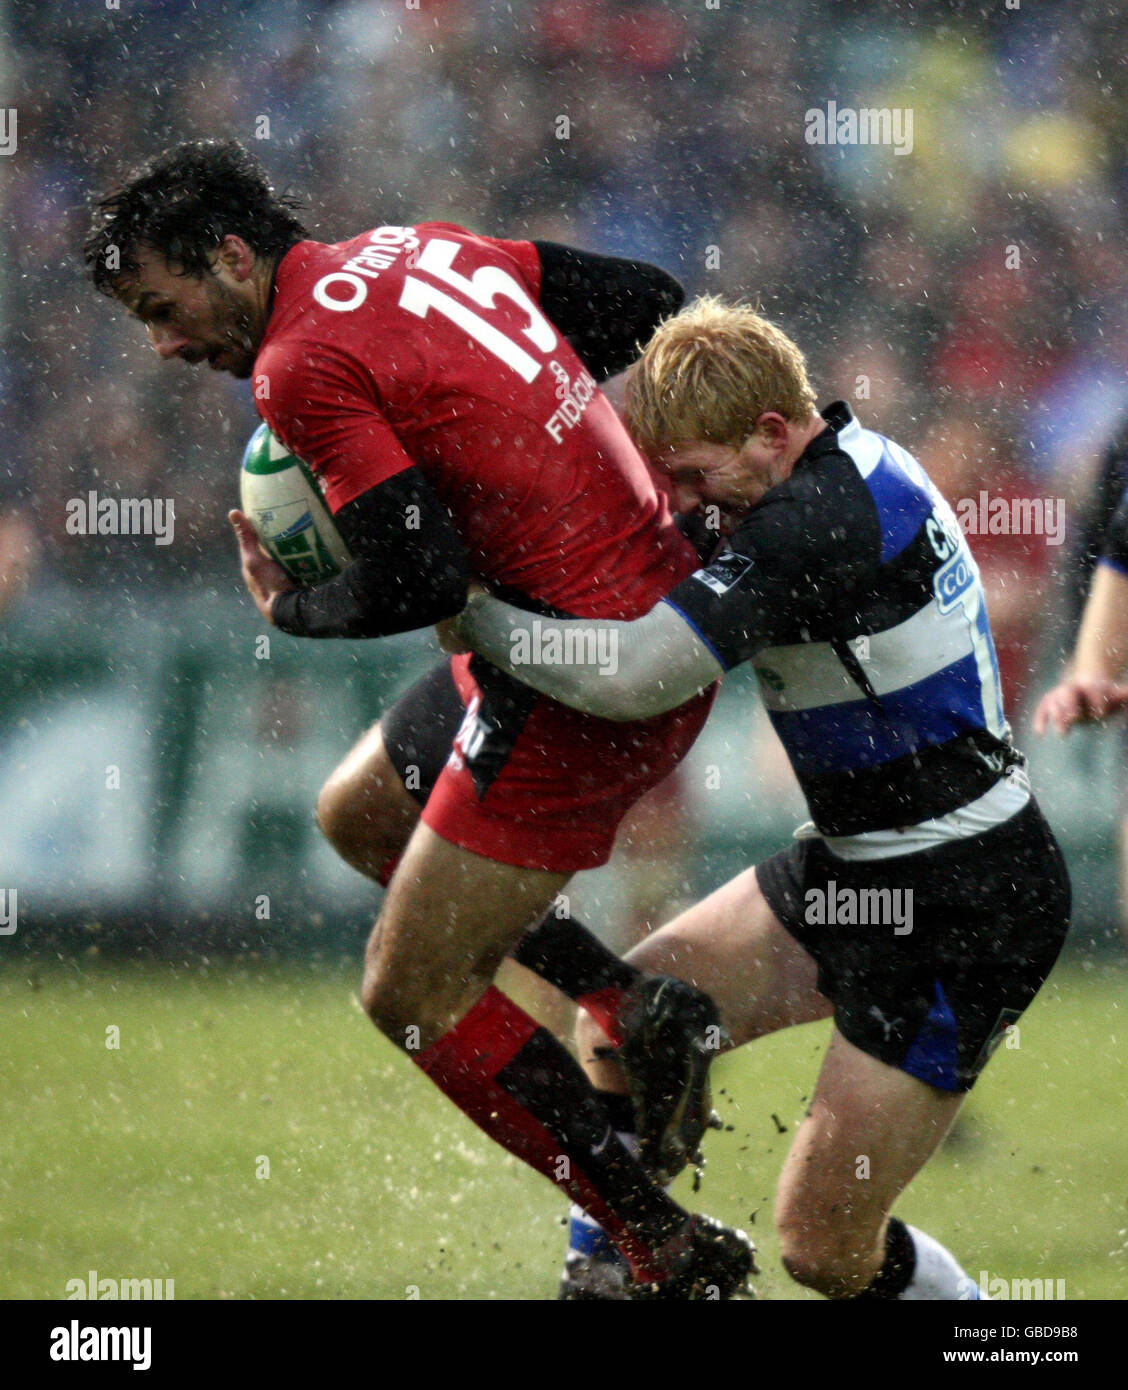 Rugby Union - Heineken Cup - Pool Five - Bath Rugby v Toulouse - The Recreation Ground. Toulouse's Clement Poitrenaud is tackled by Bath's Alex Crockett during the Heineken Cup match at The Recreation Ground, Bath. Stock Photo